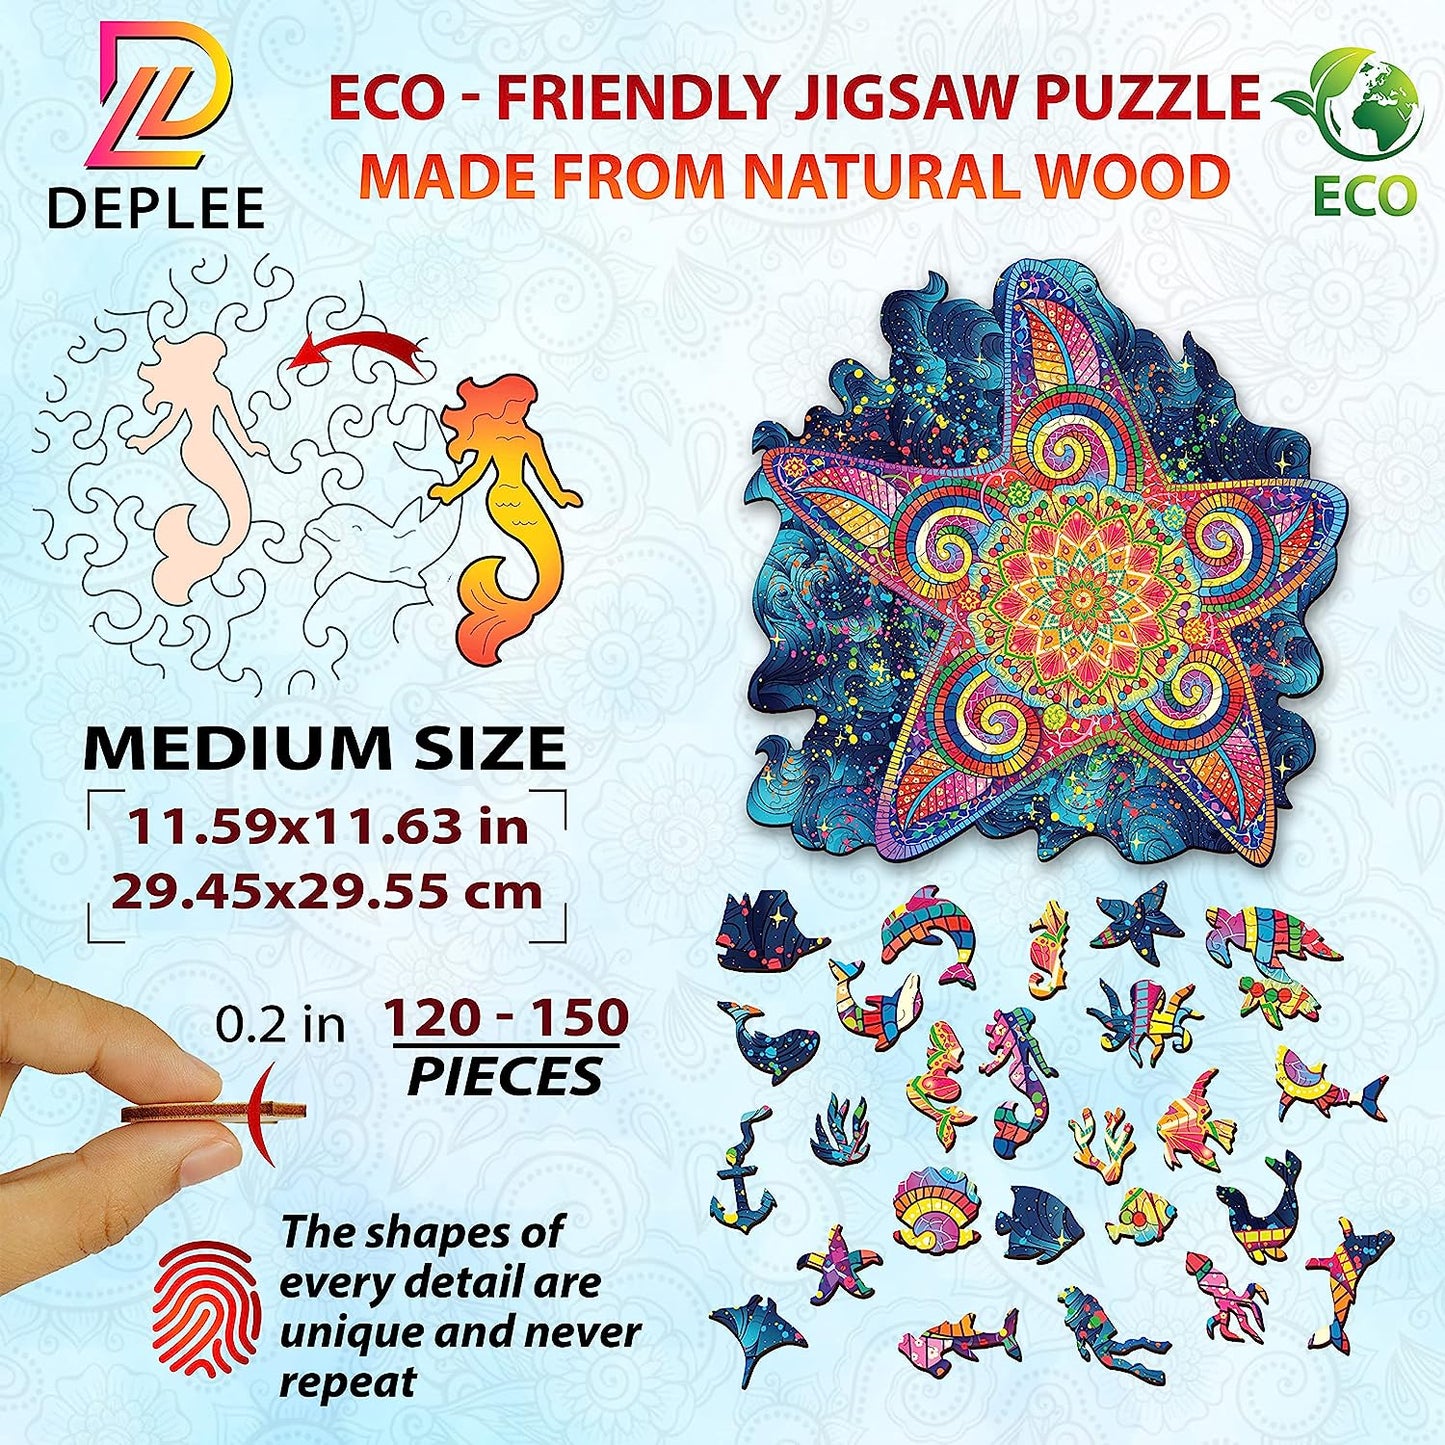 Wooden Puzzles for Adults Starfish Wooden Jigsaw Puzzles Unique Shape Wooden Animal Puzzle Creative Challenge for Adults, Family, Friend|205 Pcs– 11.6x11.6 in| Medium